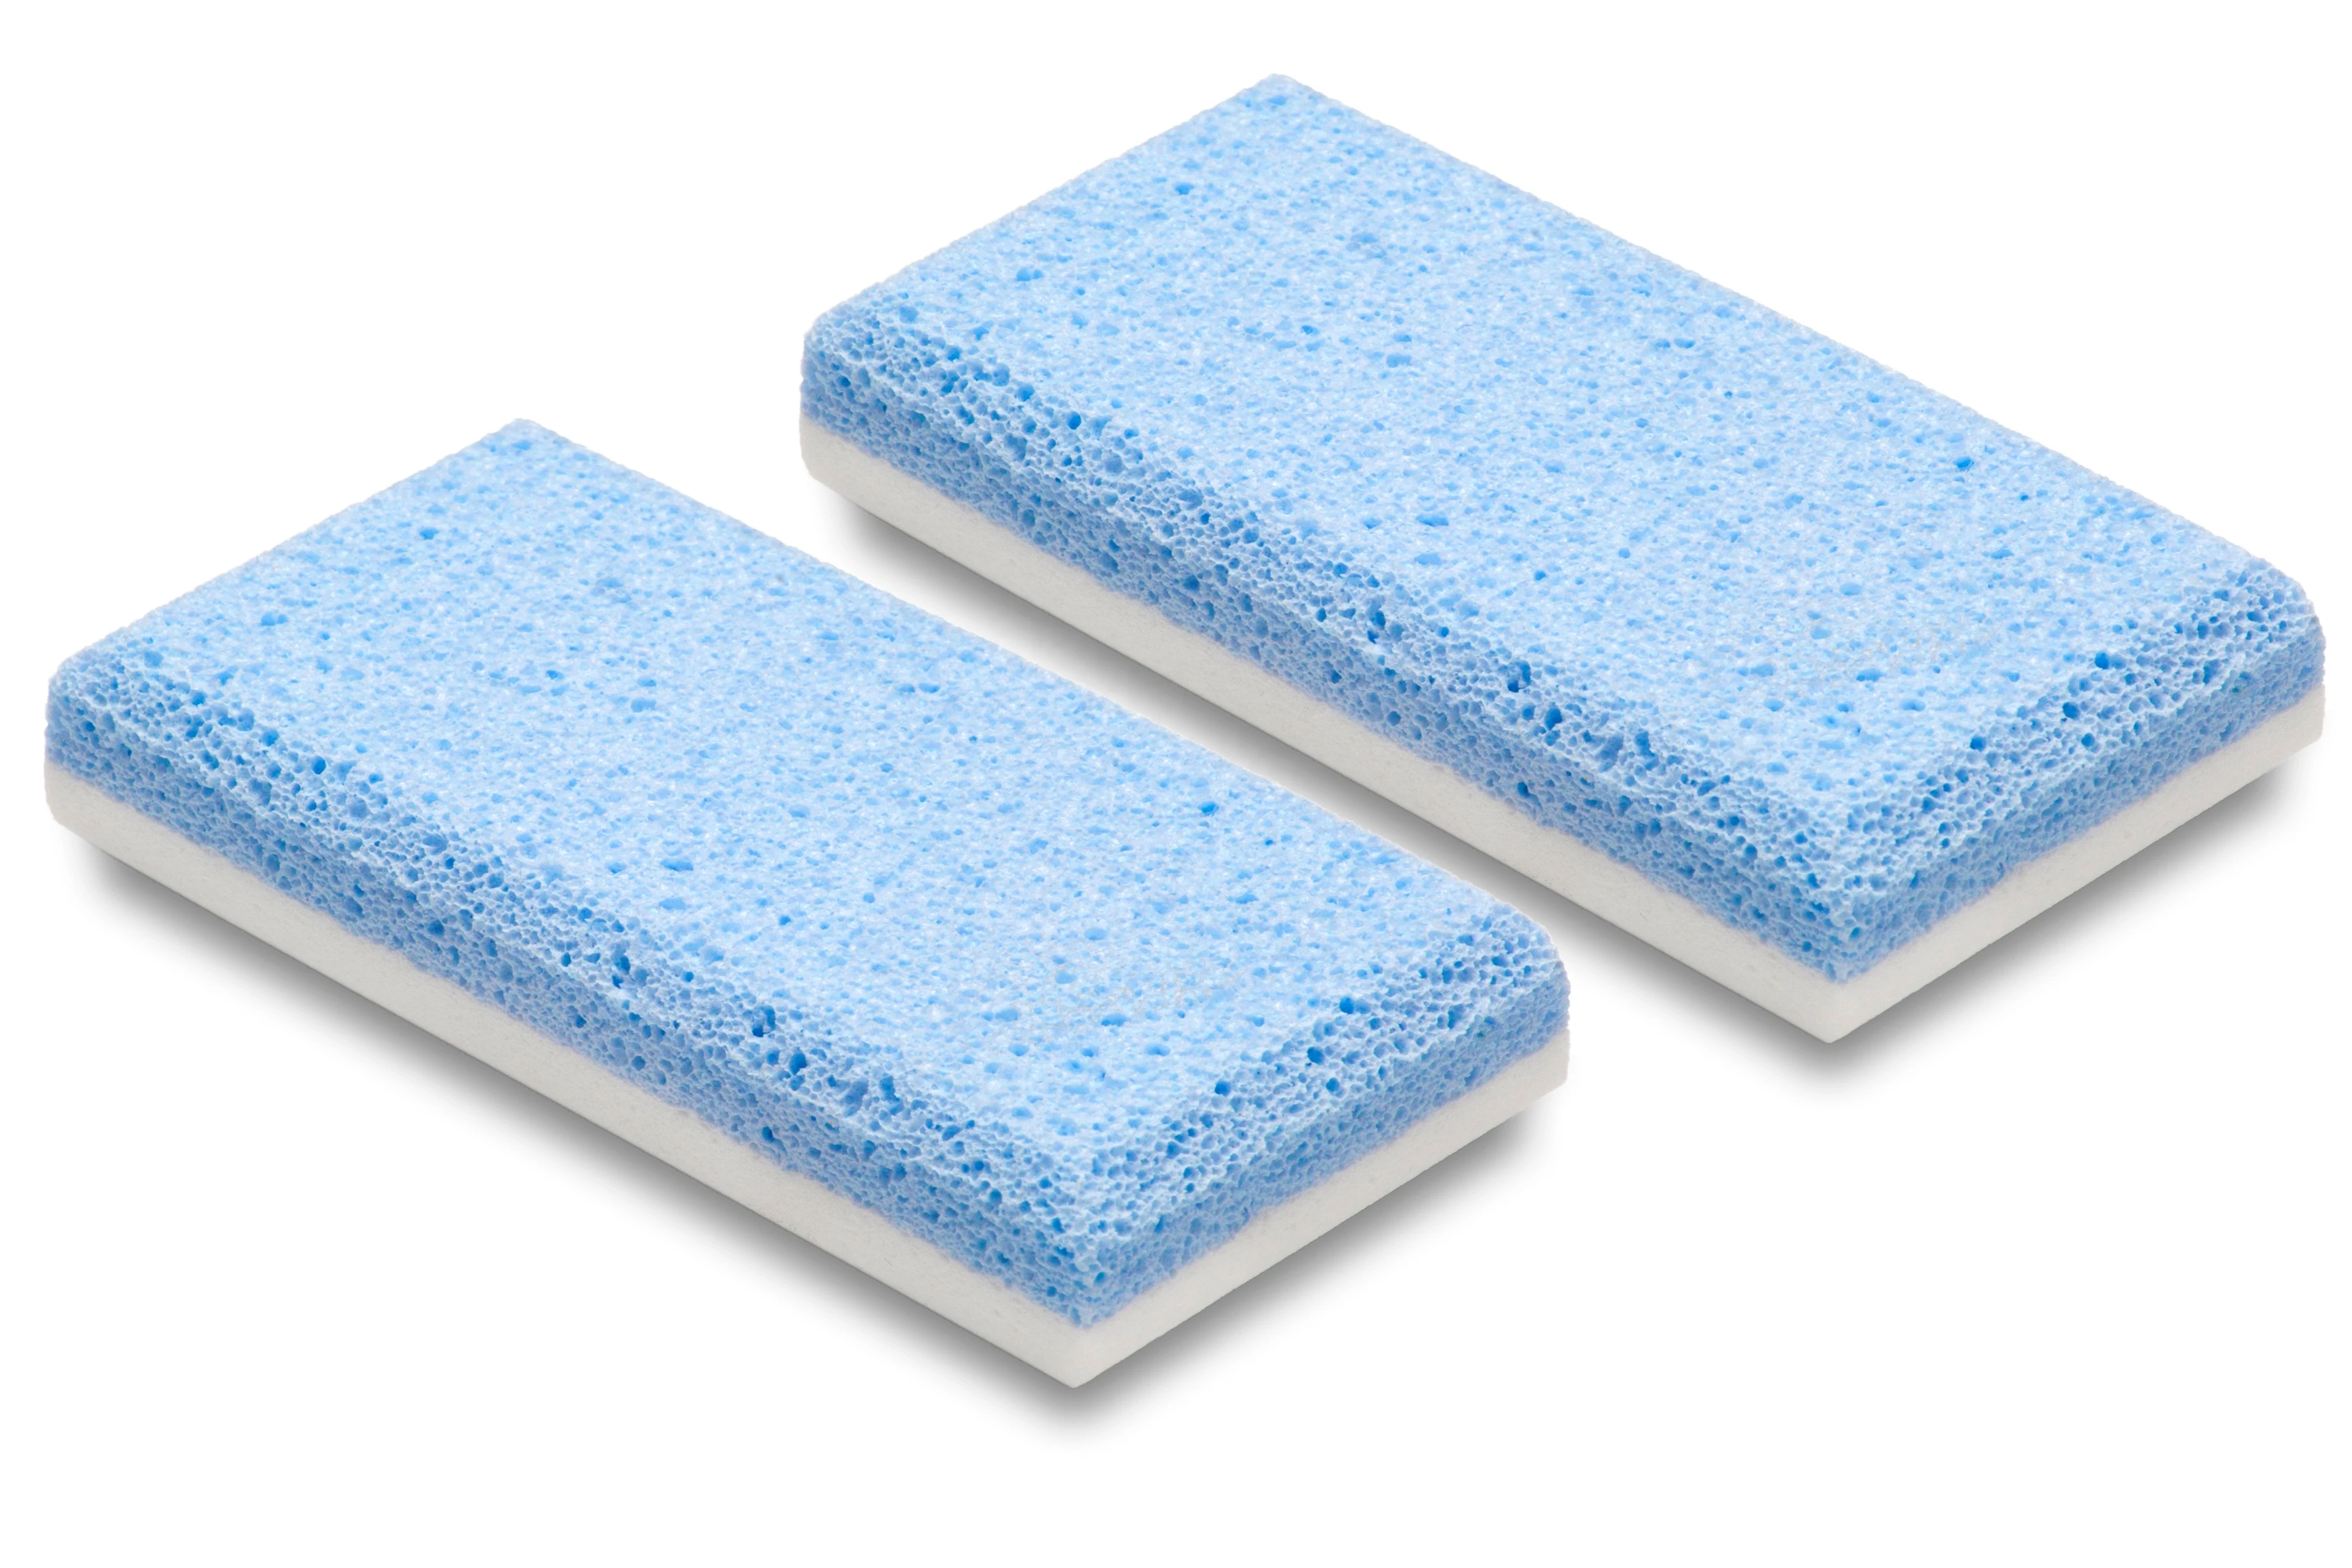 Dual action pumice stone - only manufacturer that makes this stone in only one piece - Highest quality